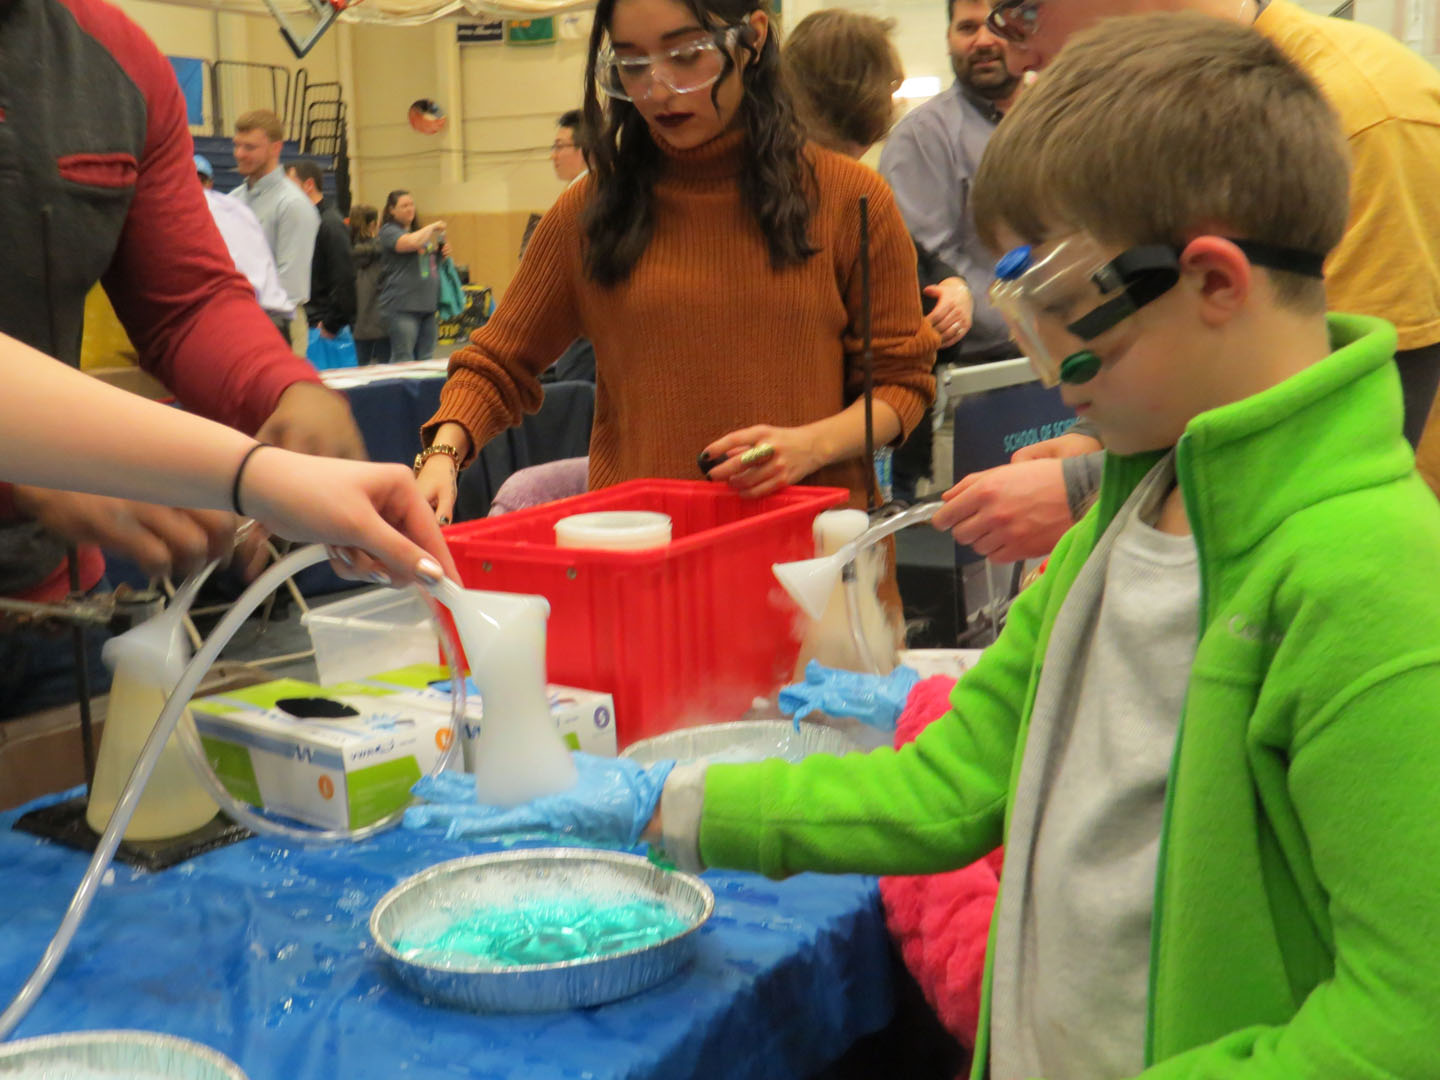 A student attends the STEAM Fair at Penn State Behrend.